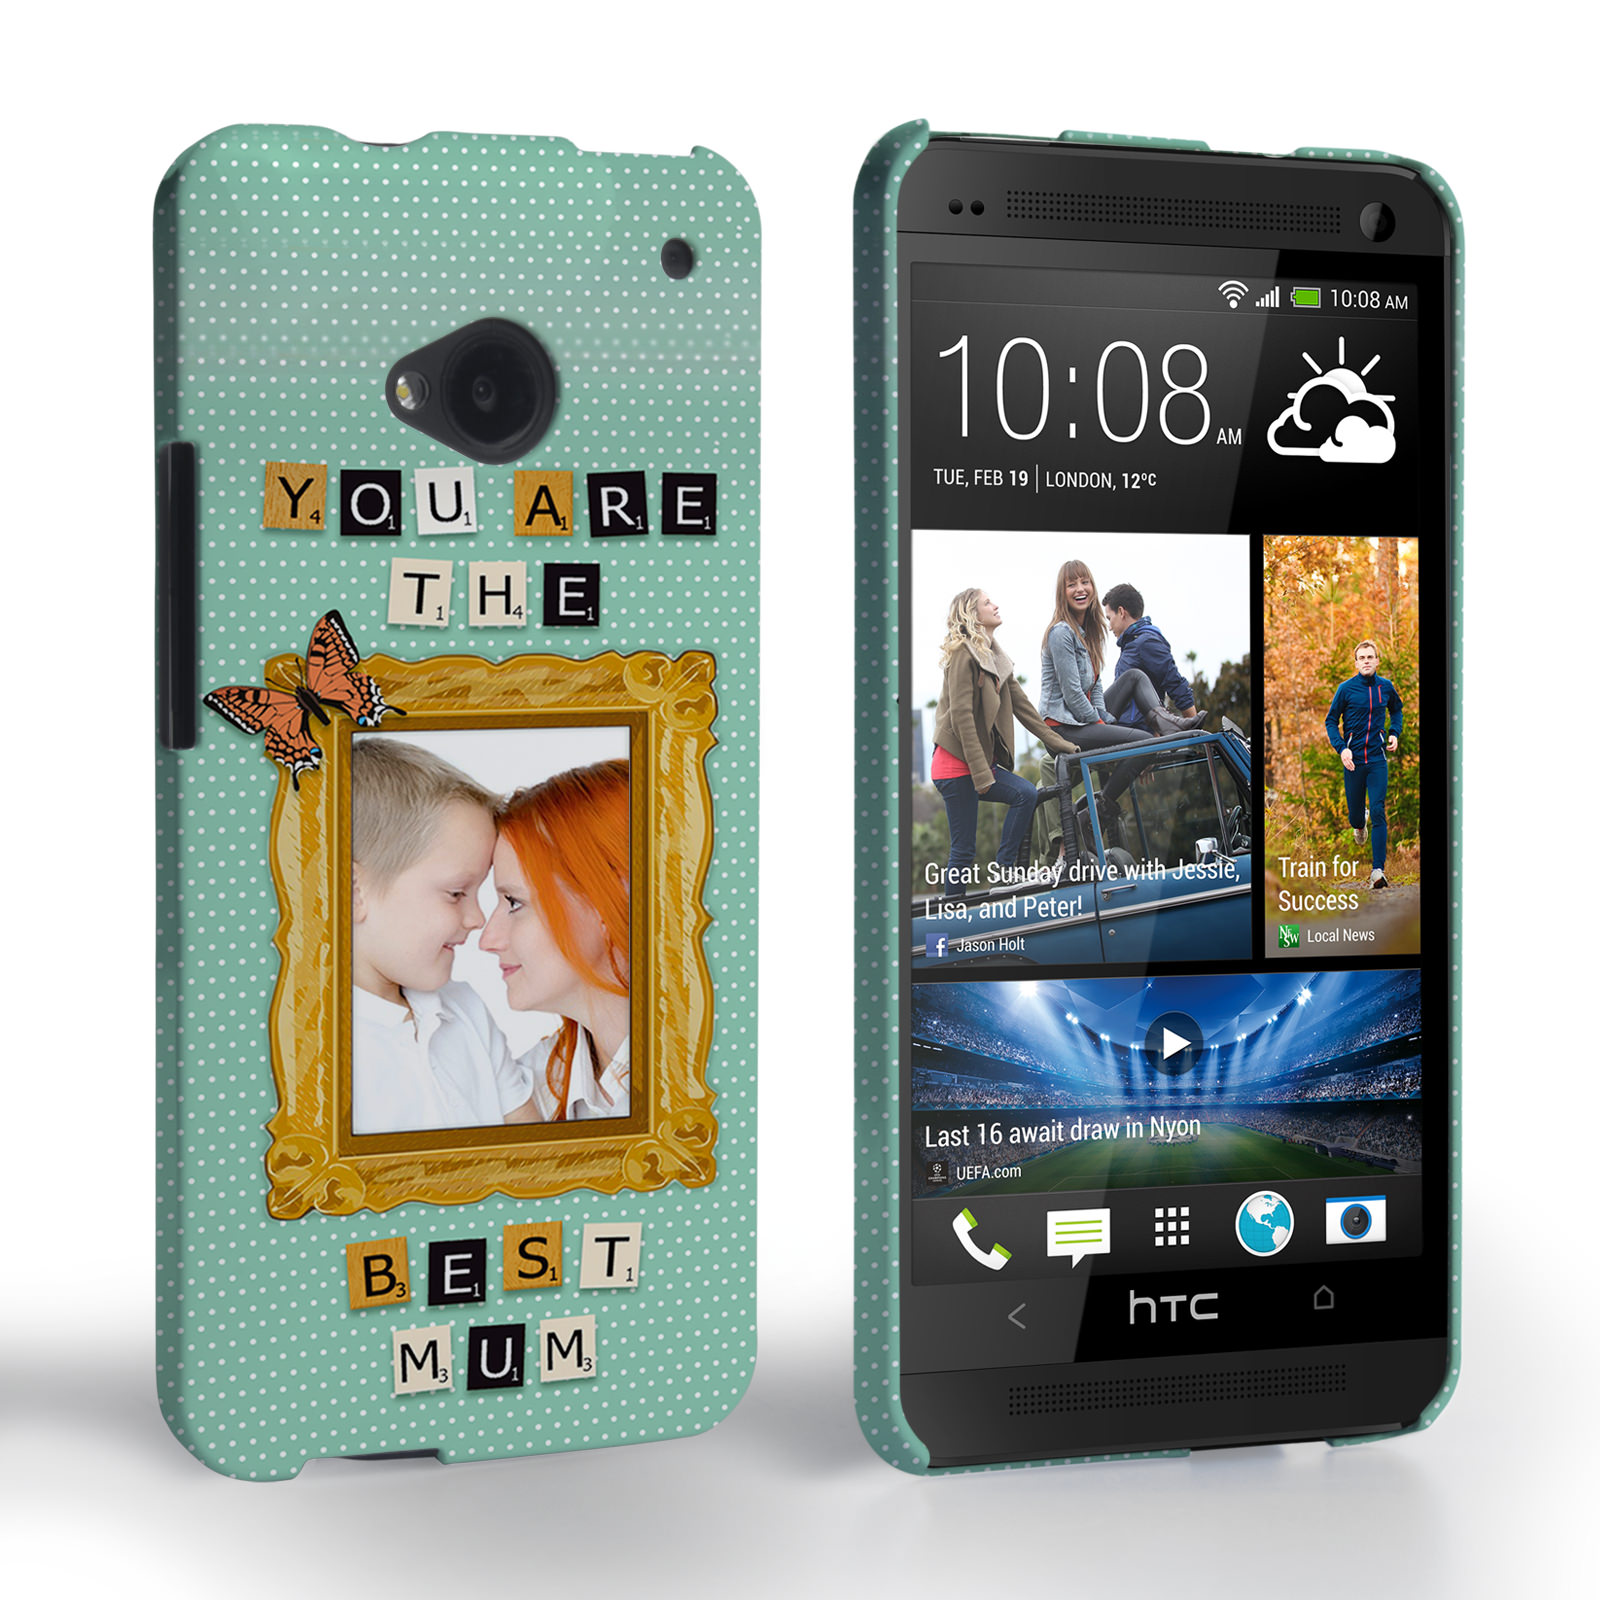 Caseflex HTC One 'You are the best Mum’ Personalised Hard Case – Blue